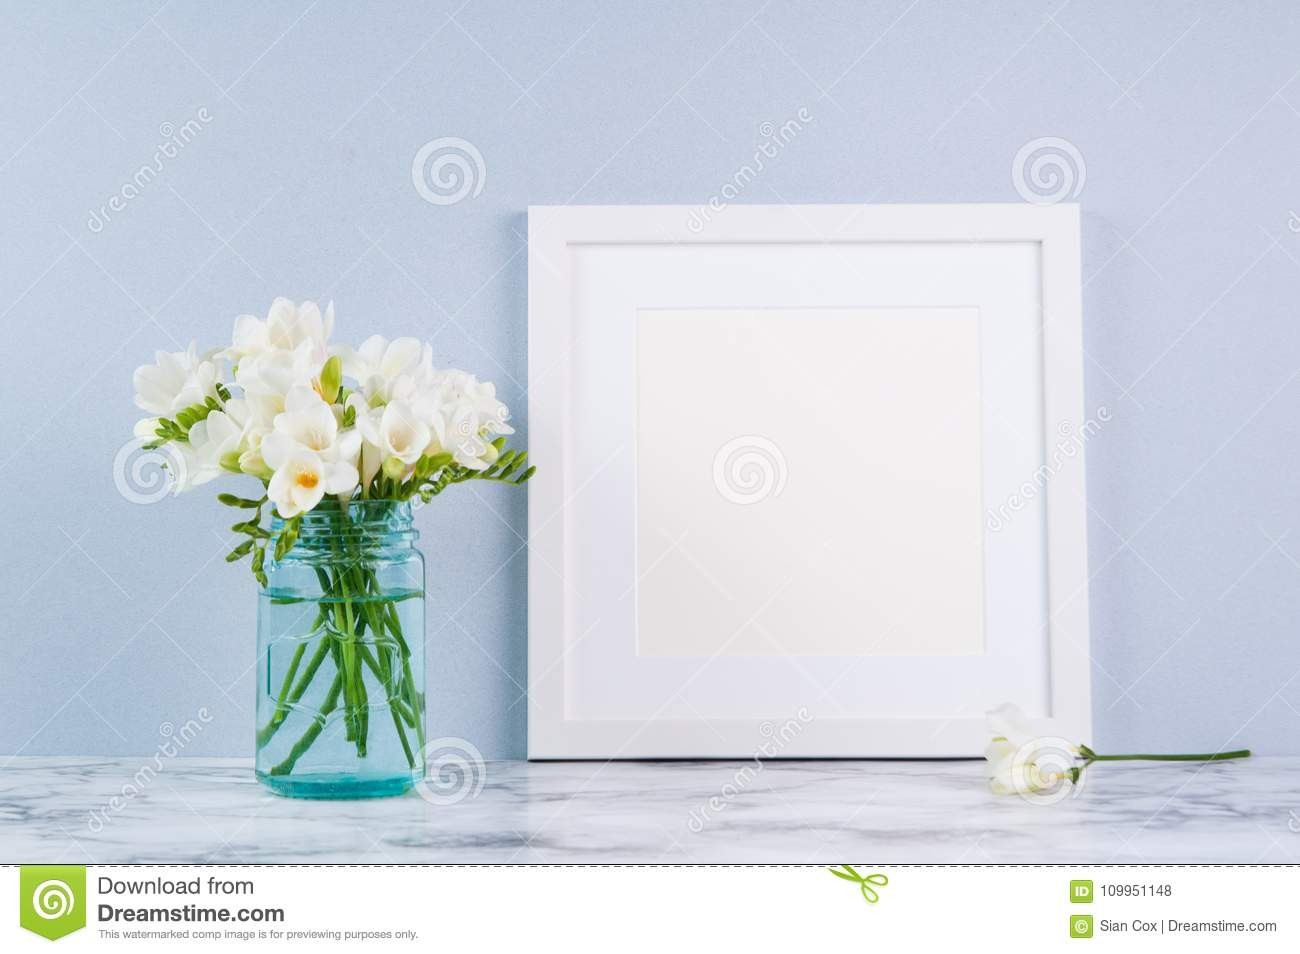 13 attractive Little Flower Vases 2024 free download little flower vases of 27 beautiful flower arrangements square vases flower decoration ideas within flower arrangements square vases luxury frame mockup stock photo image of mock fressia blu